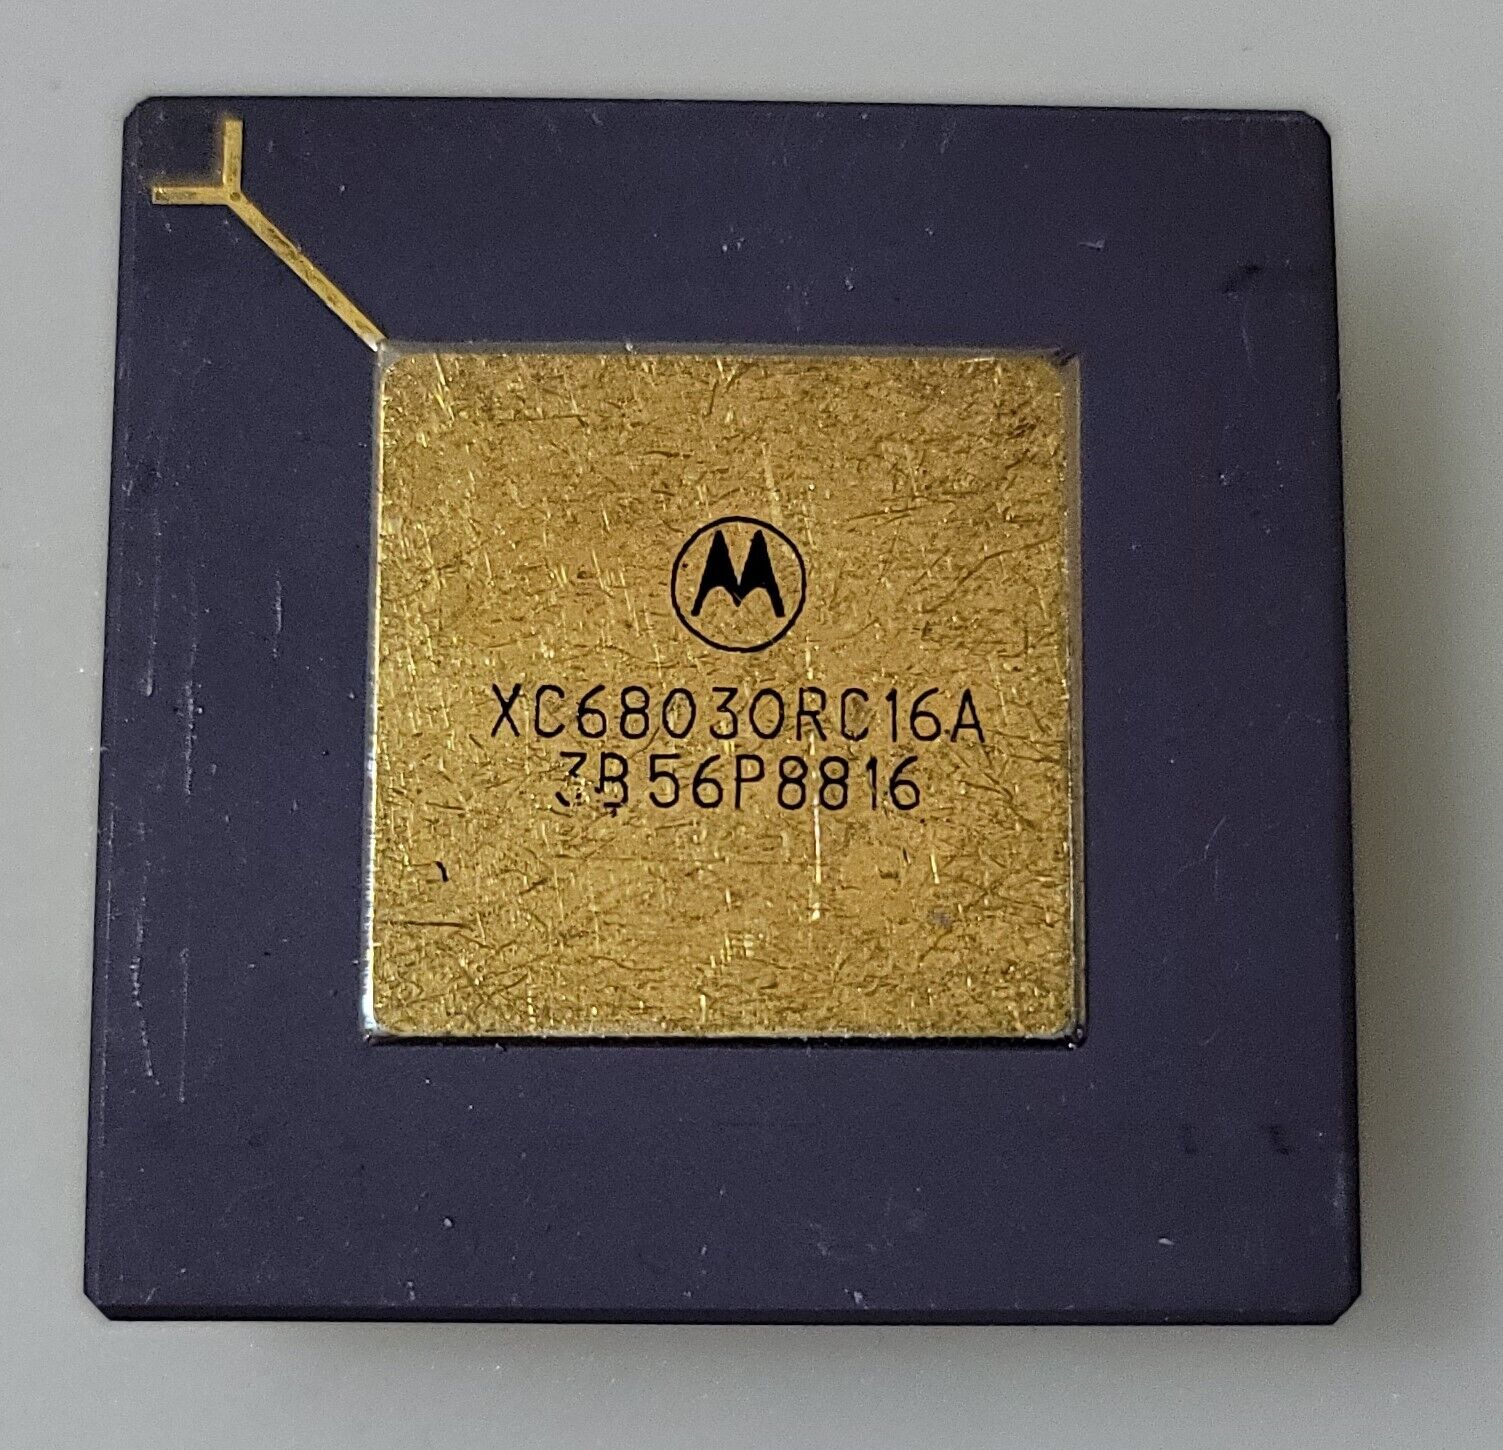 Vintage Rare Motorola XC68030RC16A Processor For Collection or Gold Recovery